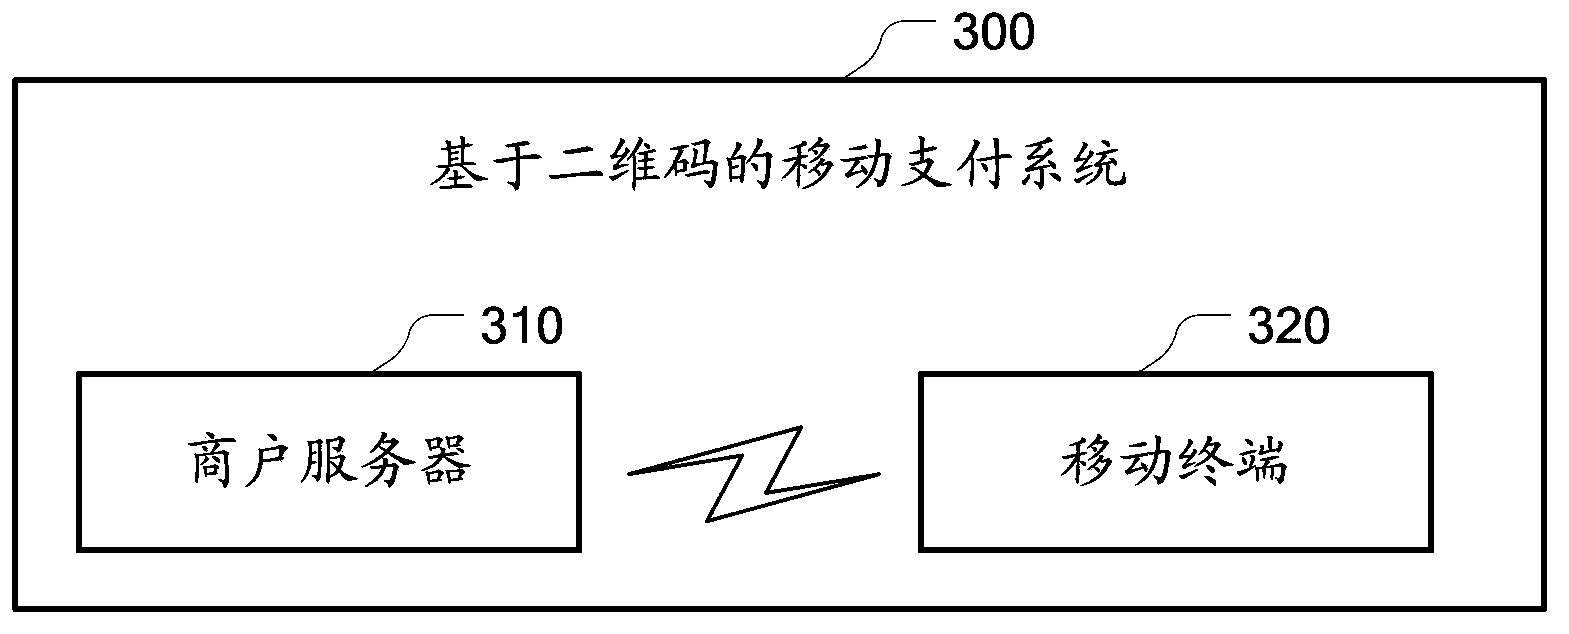 Mobile payment method and system based on two-dimension codes